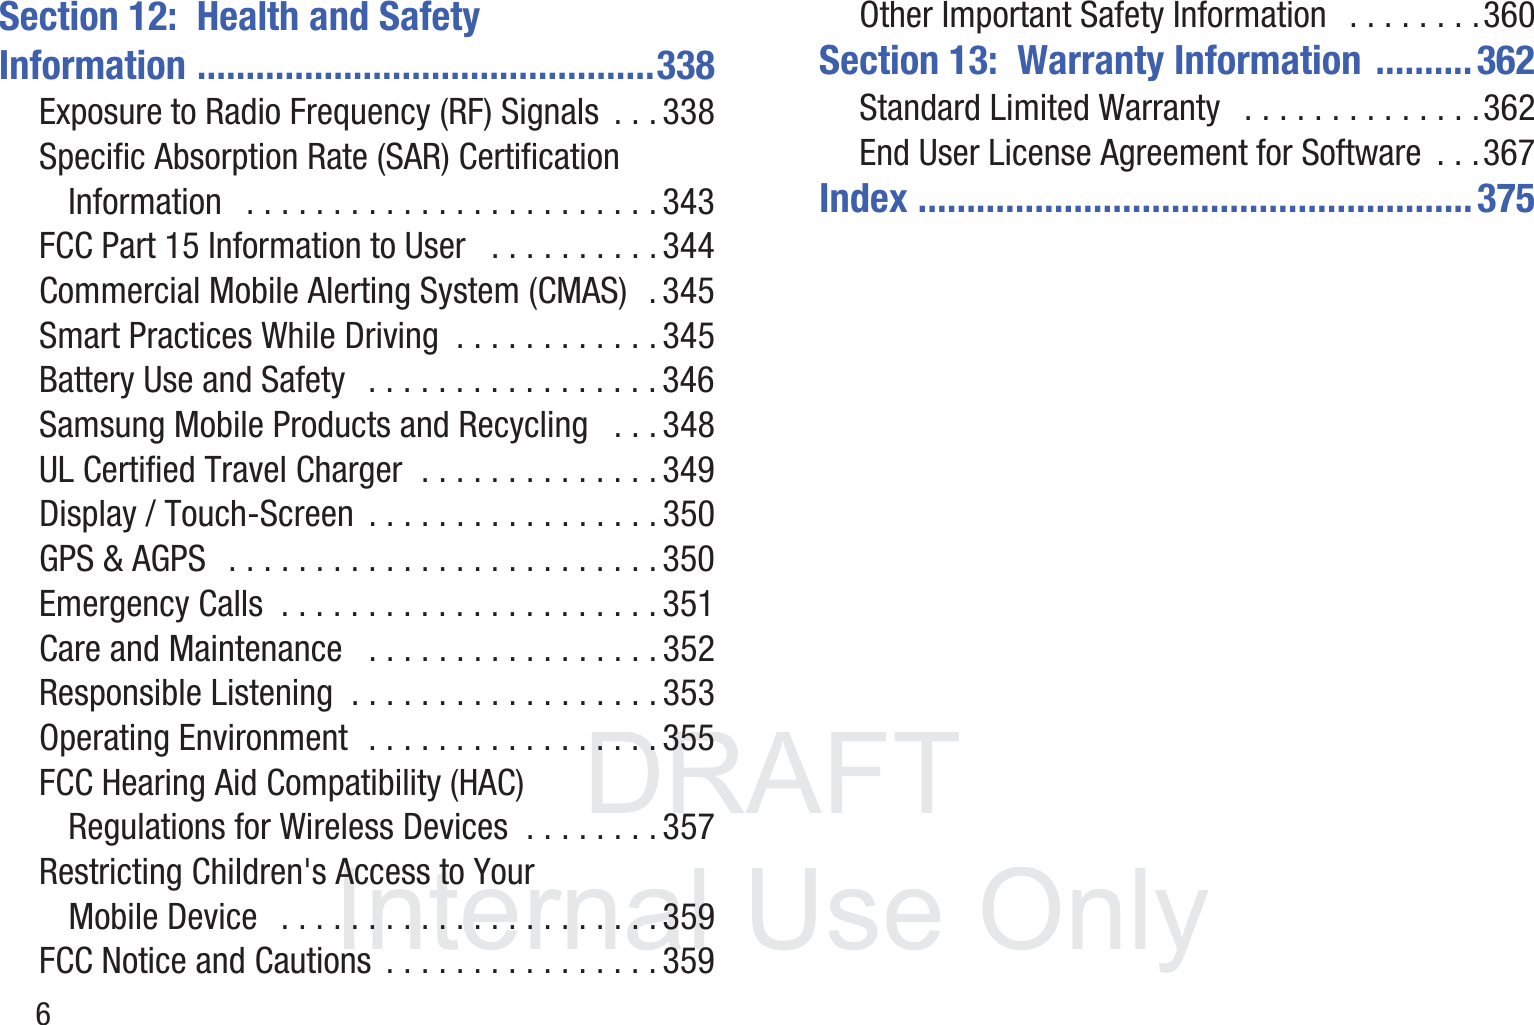 DRAFT InternalUse Only6Section 12:  Health and Safety Information ...............................................338Exposure to Radio Frequency (RF) Signals  . . . 338Specific Absorption Rate (SAR) Certification Information   . . . . . . . . . . . . . . . . . . . . . . . . 343FCC Part 15 Information to User   . . . . . . . . . . 344Commercial Mobile Alerting System (CMAS)  . 345Smart Practices While Driving  . . . . . . . . . . . . 345Battery Use and Safety   . . . . . . . . . . . . . . . . . 346Samsung Mobile Products and Recycling   . . . 348UL Certified Travel Charger  . . . . . . . . . . . . . . 349Display / Touch-Screen  . . . . . . . . . . . . . . . . . 350GPS &amp; AGPS   . . . . . . . . . . . . . . . . . . . . . . . . . 350Emergency Calls  . . . . . . . . . . . . . . . . . . . . . . 351Care and Maintenance   . . . . . . . . . . . . . . . . . 352Responsible Listening  . . . . . . . . . . . . . . . . . . 353Operating Environment  . . . . . . . . . . . . . . . . . 355FCC Hearing Aid Compatibility (HAC) Regulations for Wireless Devices  . . . . . . . . 357Restricting Children&apos;s Access to Your Mobile Device   . . . . . . . . . . . . . . . . . . . . . . 359FCC Notice and Cautions  . . . . . . . . . . . . . . . . 359Other Important Safety Information   . . . . . . . .360Section 13:  Warranty Information  ..........362Standard Limited Warranty   . . . . . . . . . . . . . .362End User License Agreement for Software  . . .367Index .........................................................375